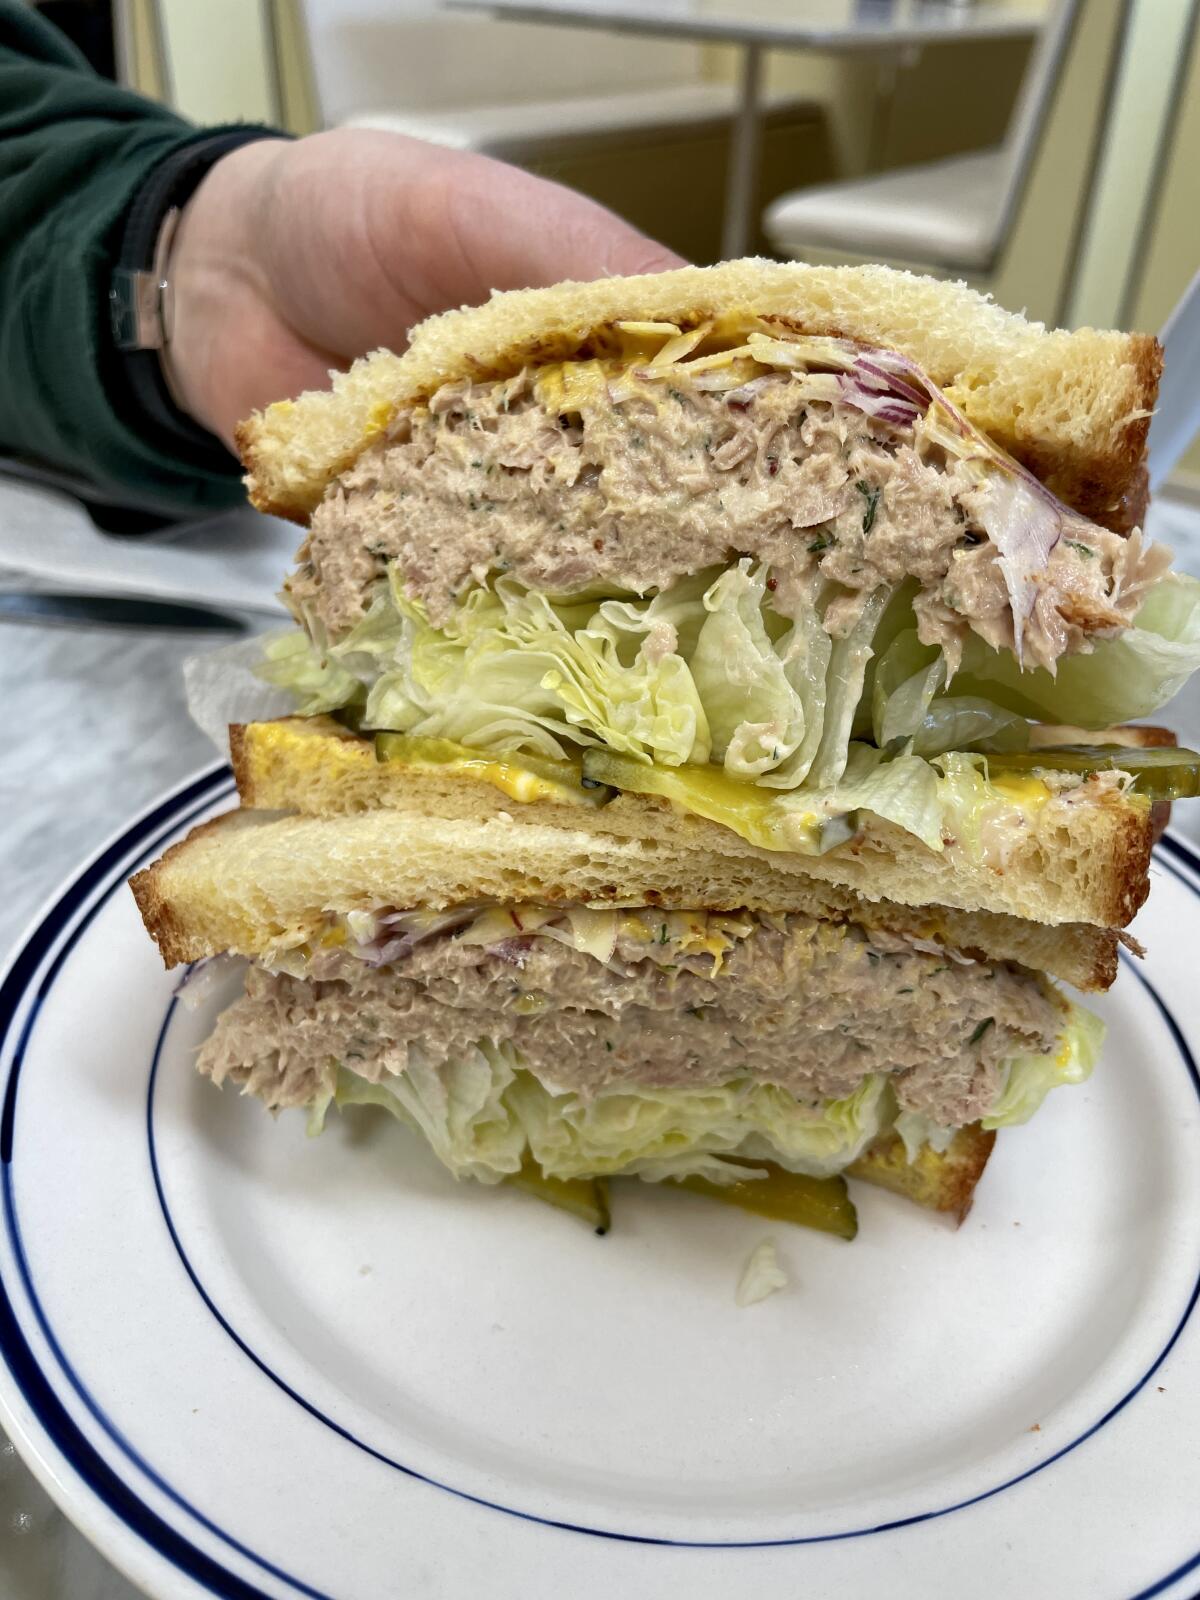 The tuna sandwich from Bub and Grandma's restaurant in Glassell Park.